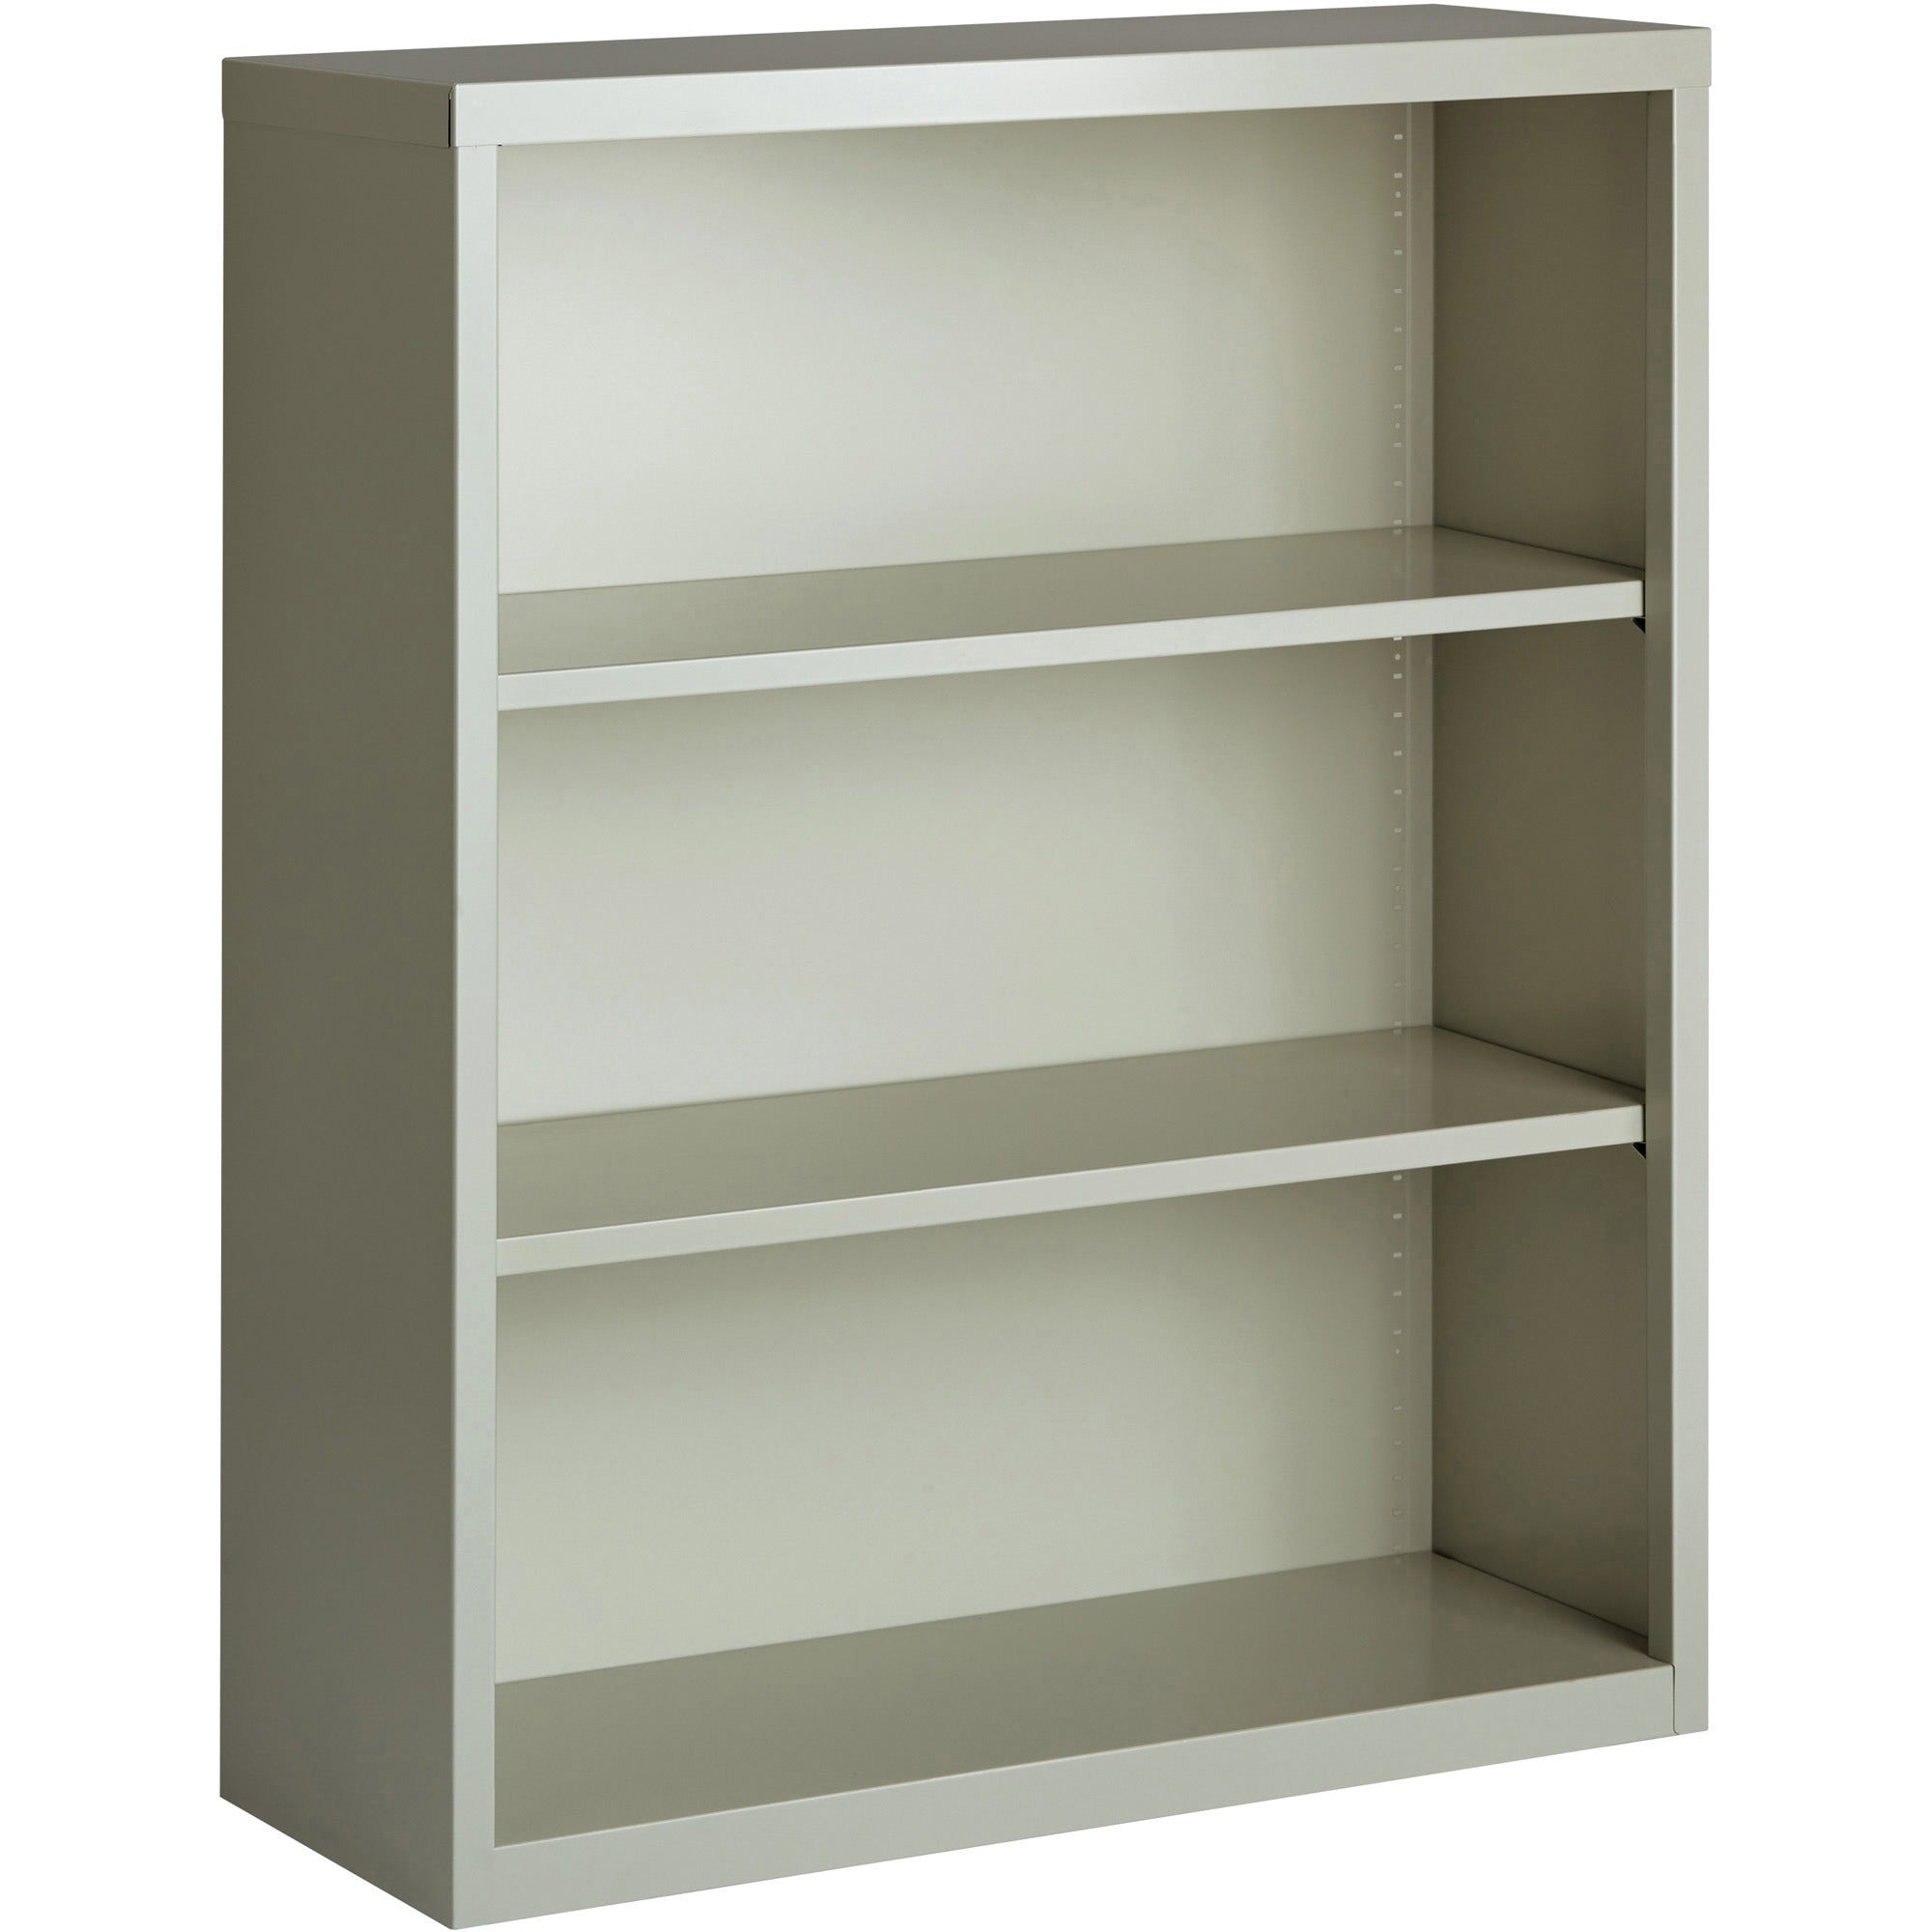 Lorell Fortress Series Bookcase - 34.5" x 13" x 42" - 3 x Shelf(ves) - Light Gray - Powder Coated - Steel - Recycled - 